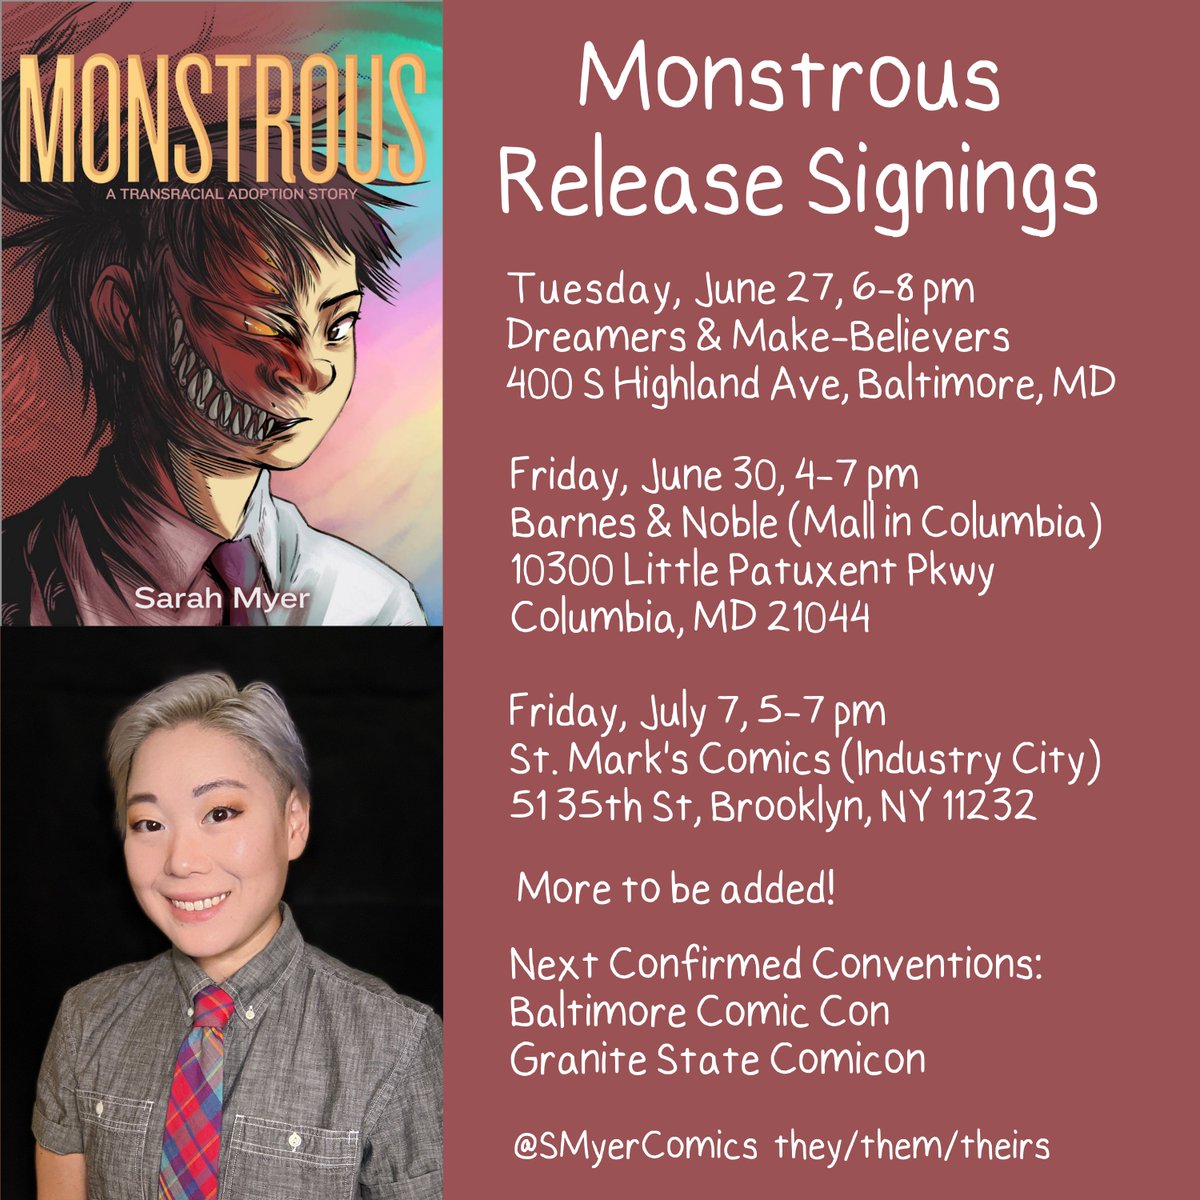 Monstrous comes out JUNE 27! #Monstrousatransracialadoptionstory #monstrous #graphicmemoir #graphicnovel Here's my signing schedule so far!
Pre-order link: us.macmillan.com/books/97812502…